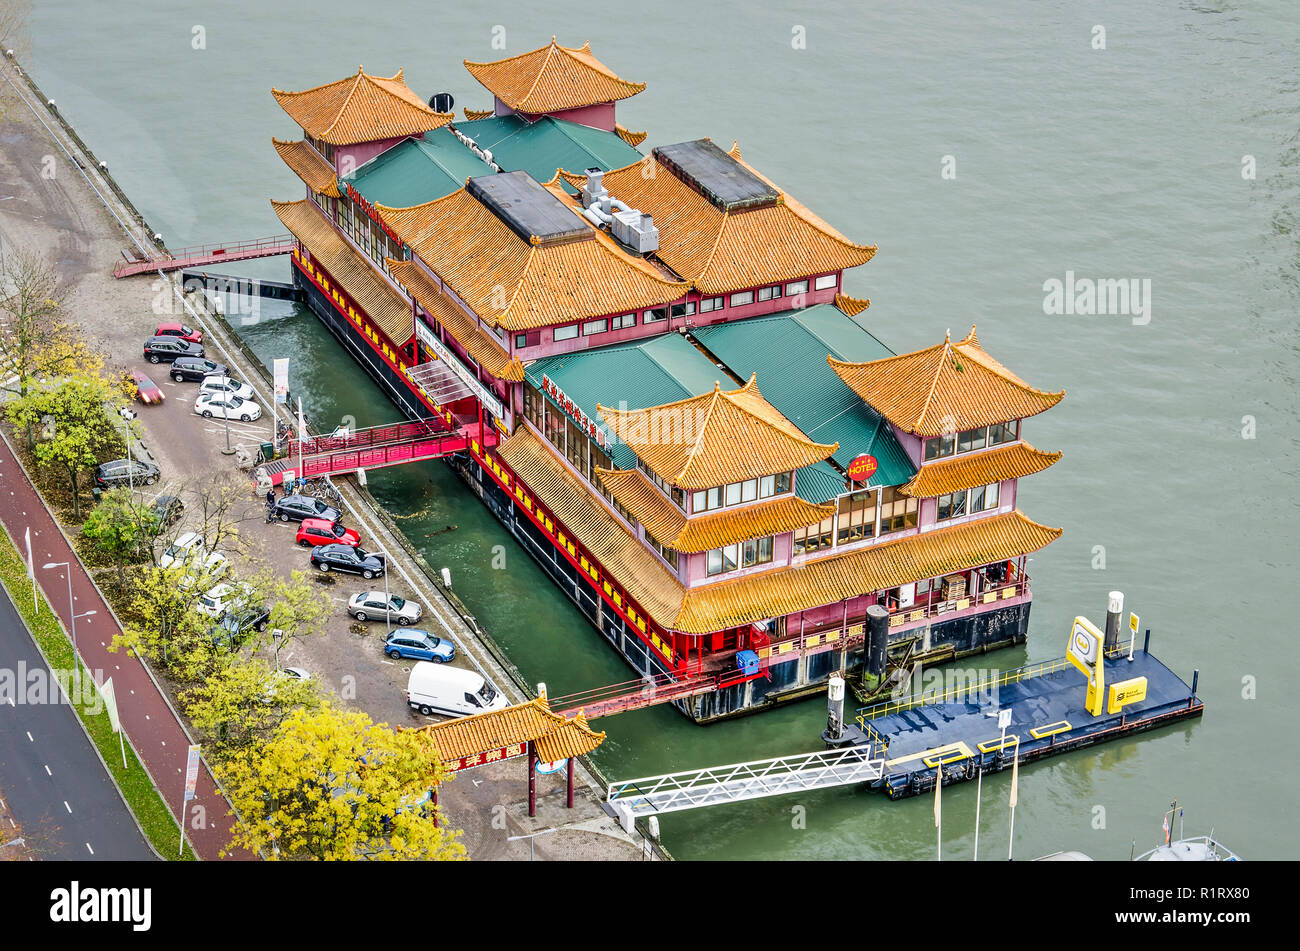 Rotterdam, The Netherlands, November 12, 2018: aerial view of the chinese pagoda-style hotel and restauruant boat that has been moored at Park Harbour Stock Photo